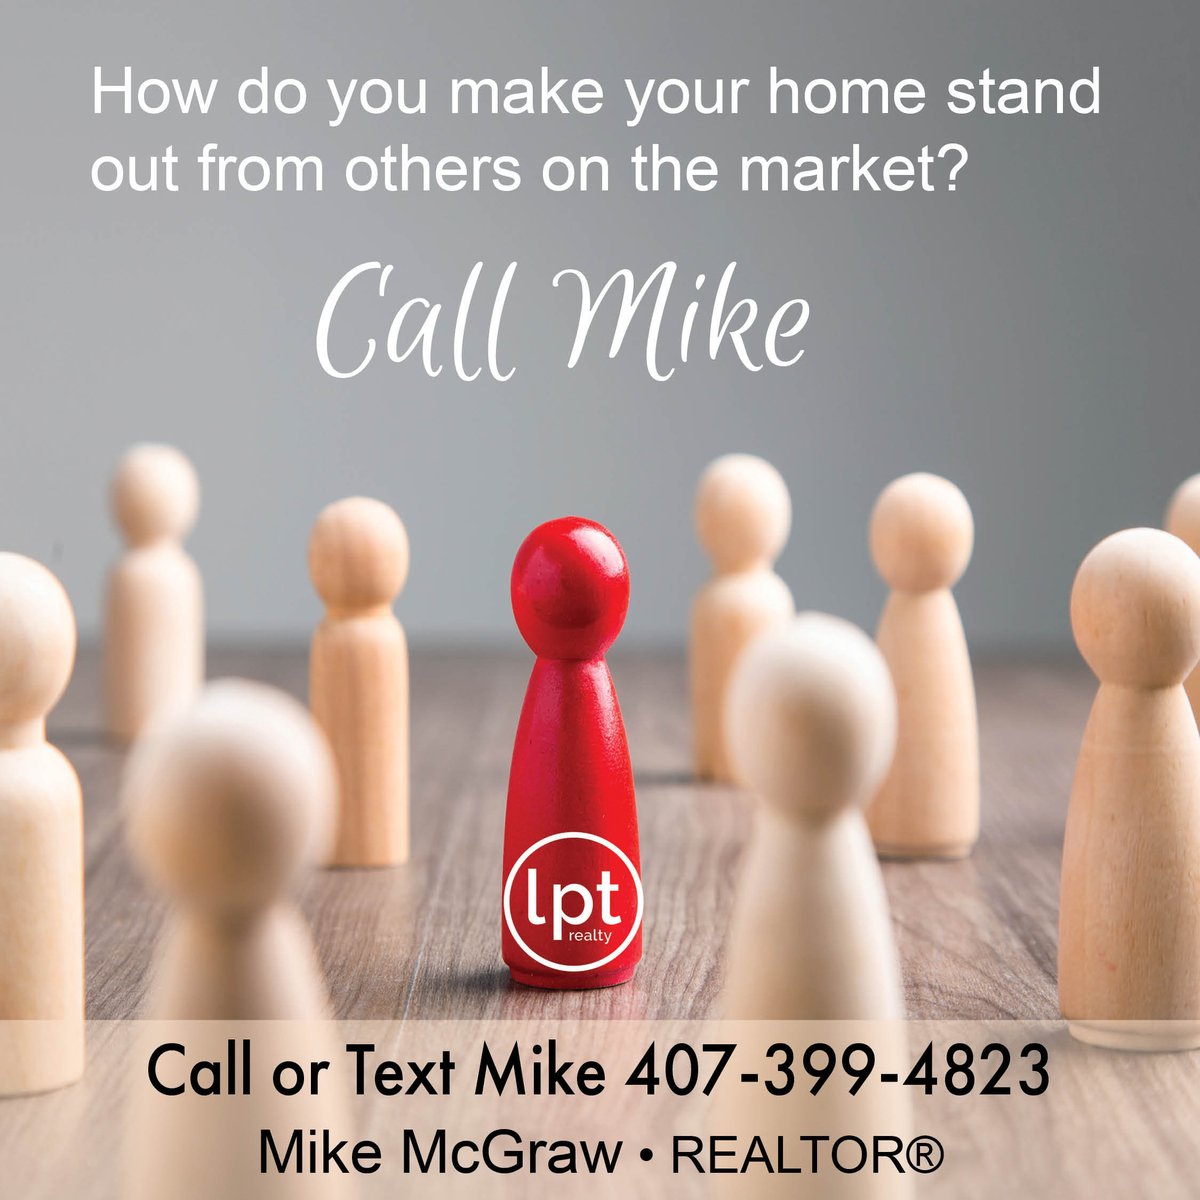 How can your home stand out in the market?
Call or text me at 407-399-4823. I'm ready to get to work for you.

#LPTRealty #LPTRealtyProud #Orlandorealestate #Apopkarealestate #RealEstate #Realtor